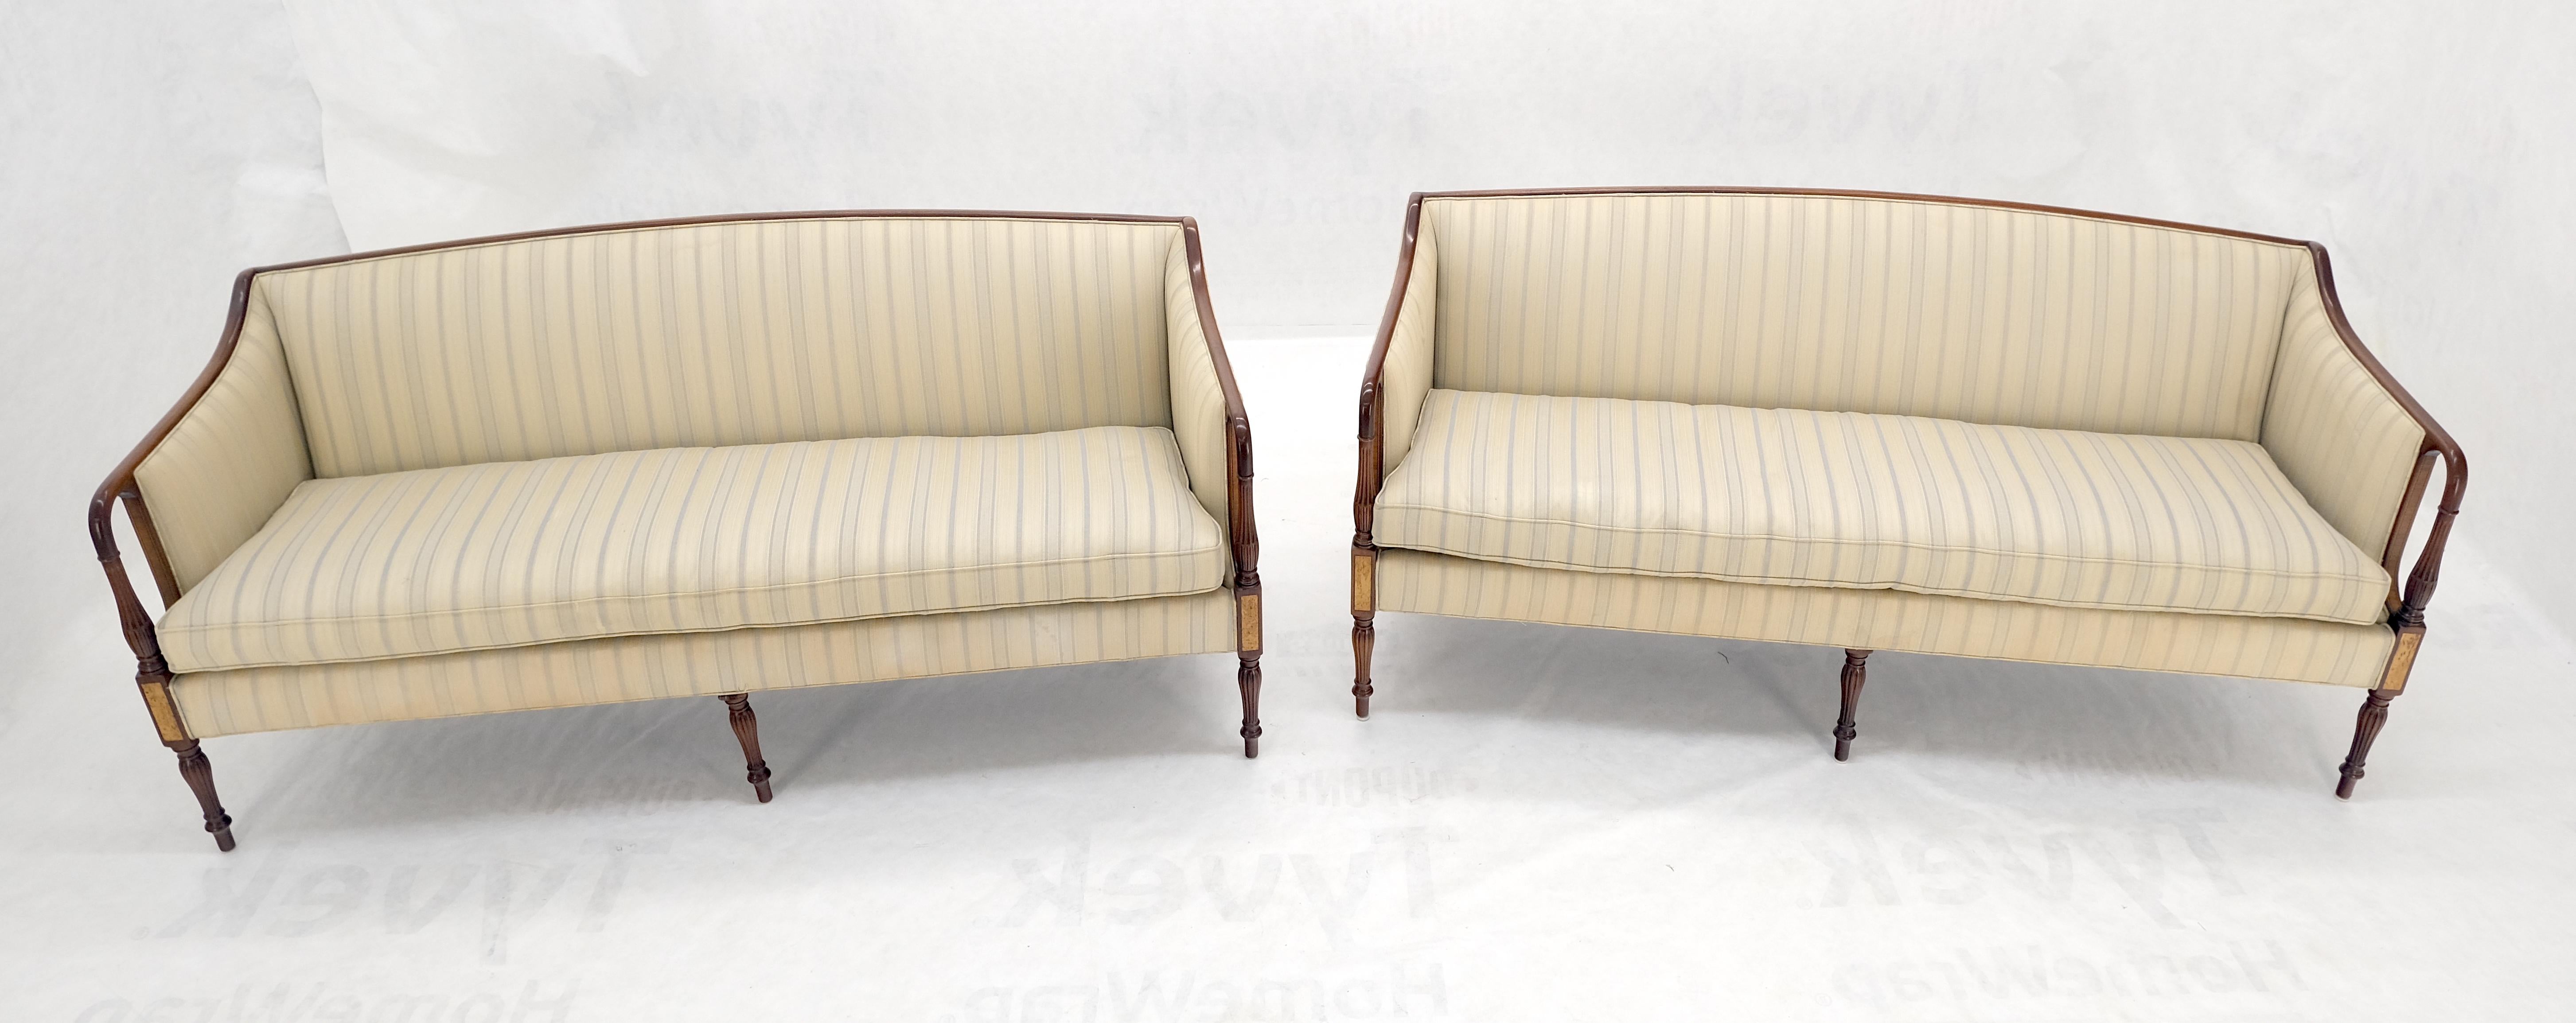 Lacquered Pair Sheraton Style Mahogany Burl Inlayed Frames Striped Upholstery Sofas MINT!